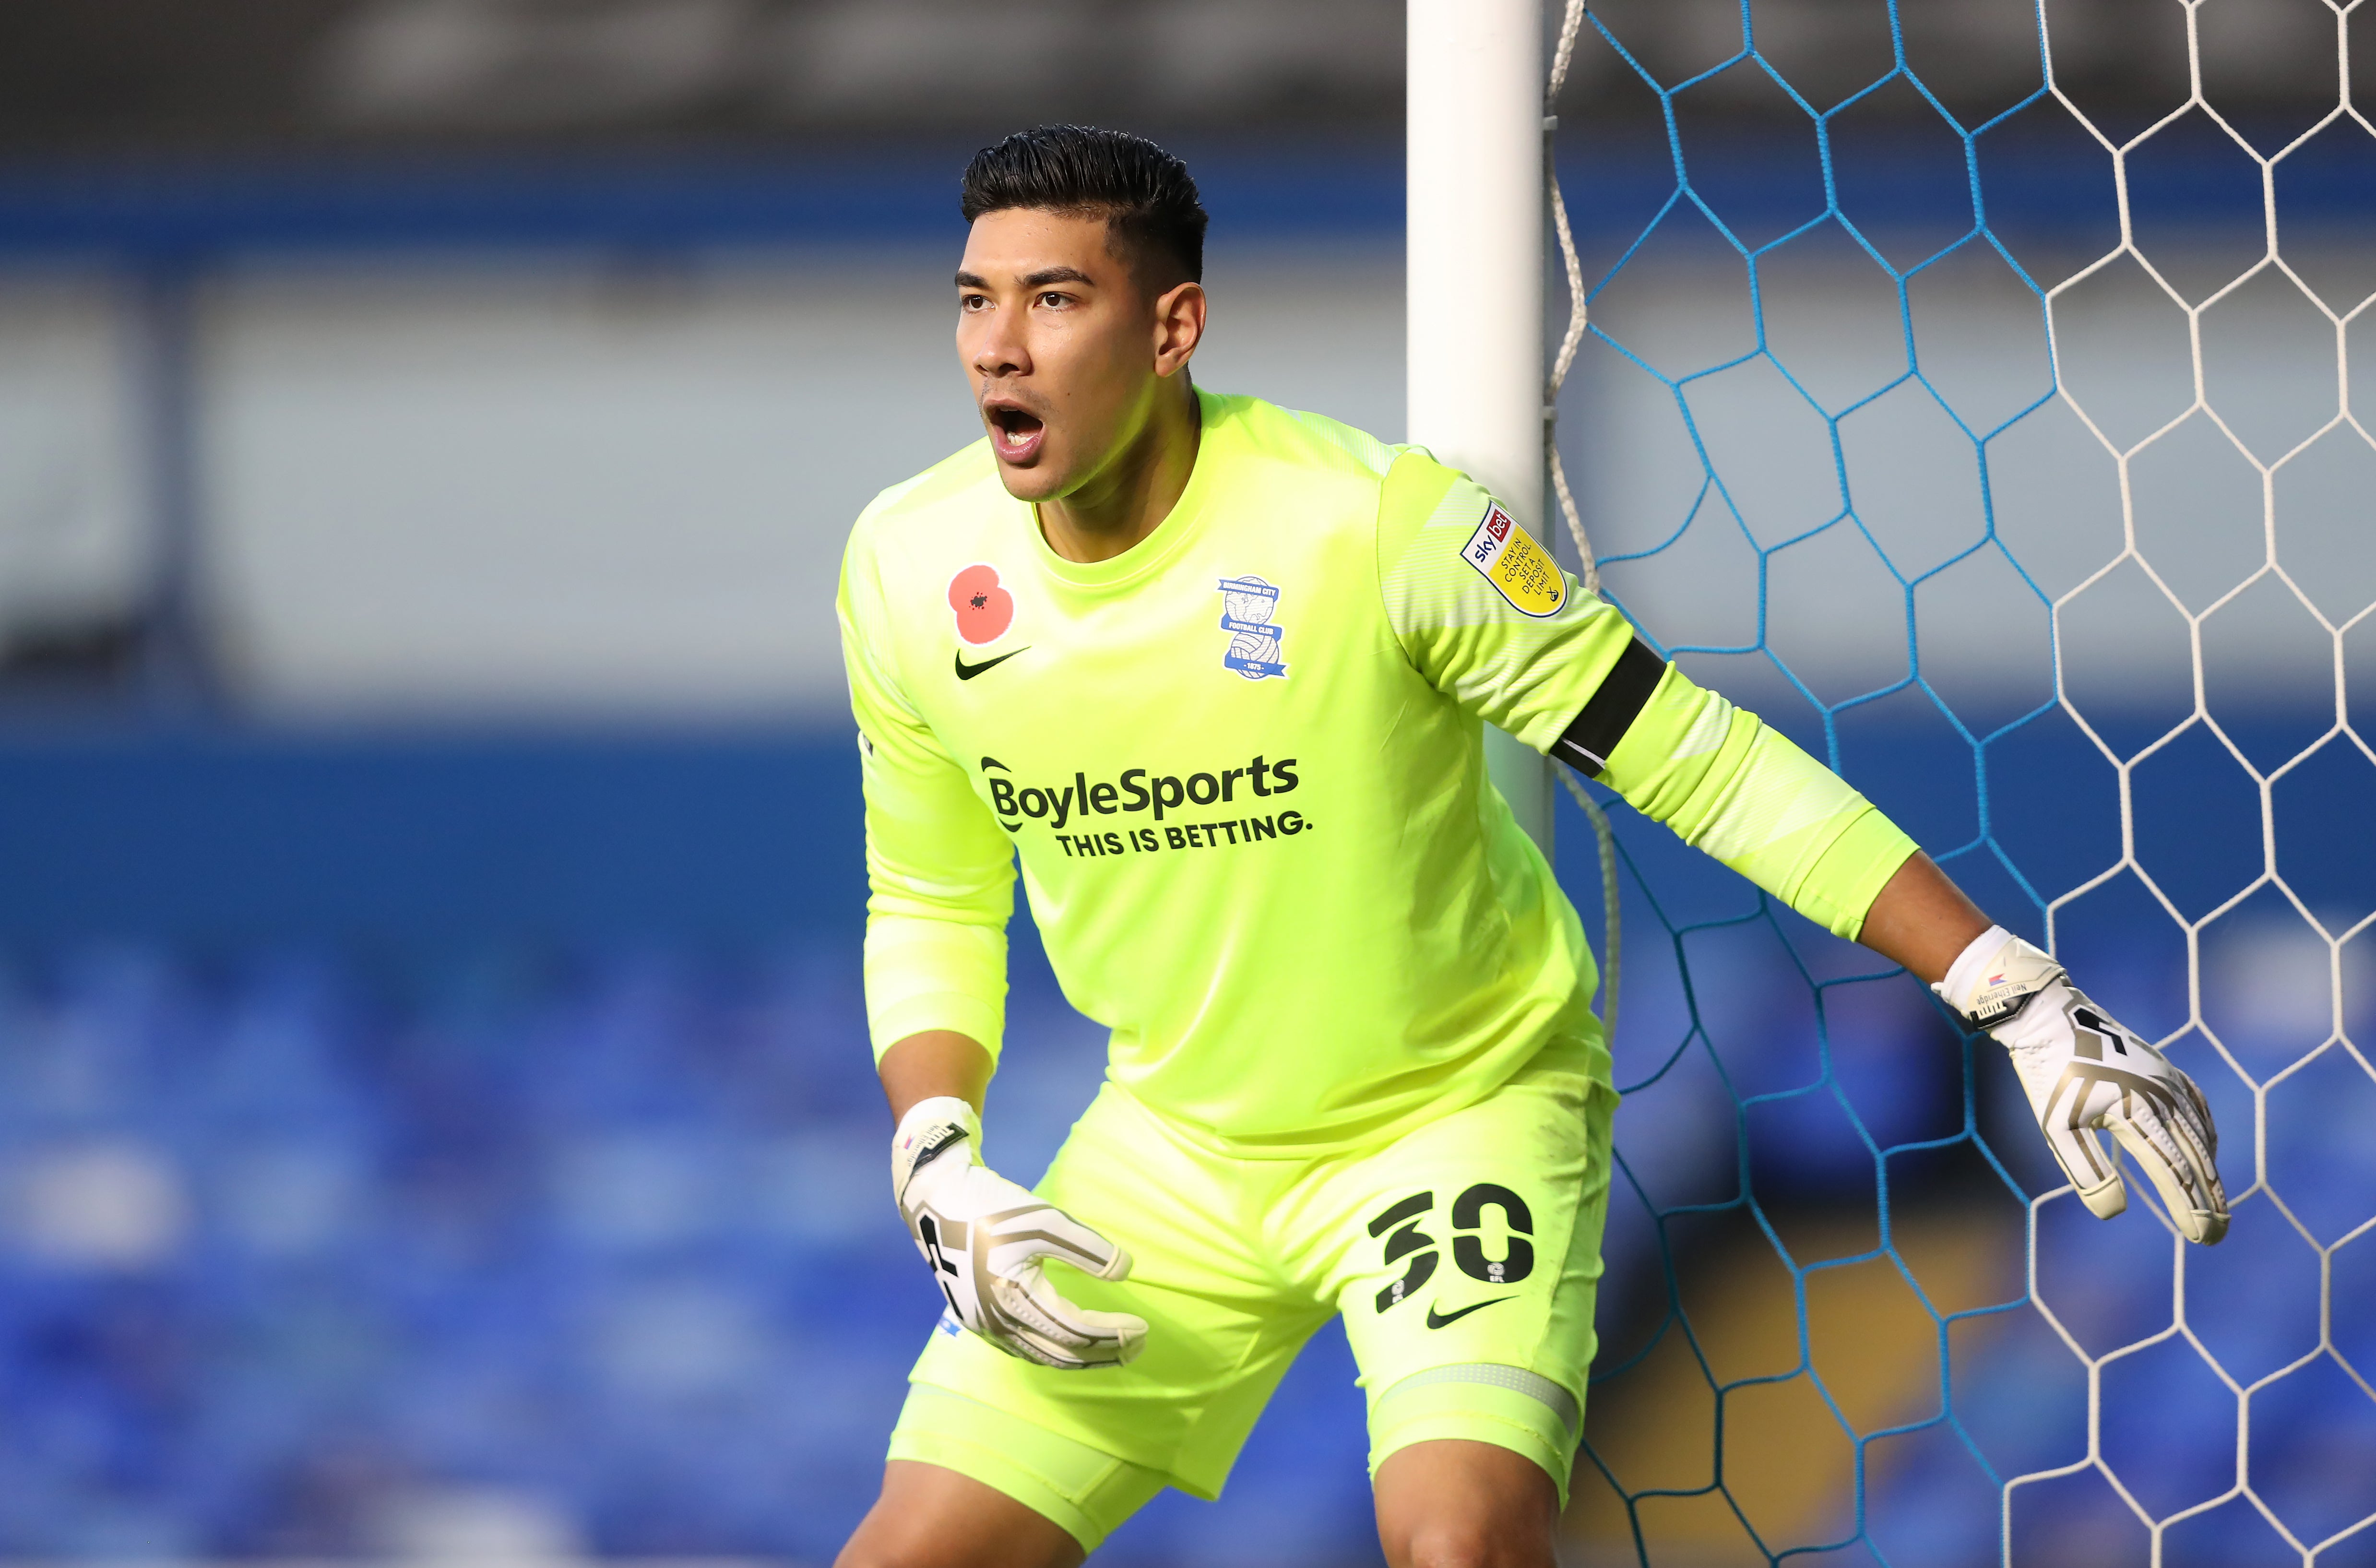 Birmingham goalkeeper Neil Etheridge feared for his life while in intensive care battling Covid-19 (David Davies/PA)